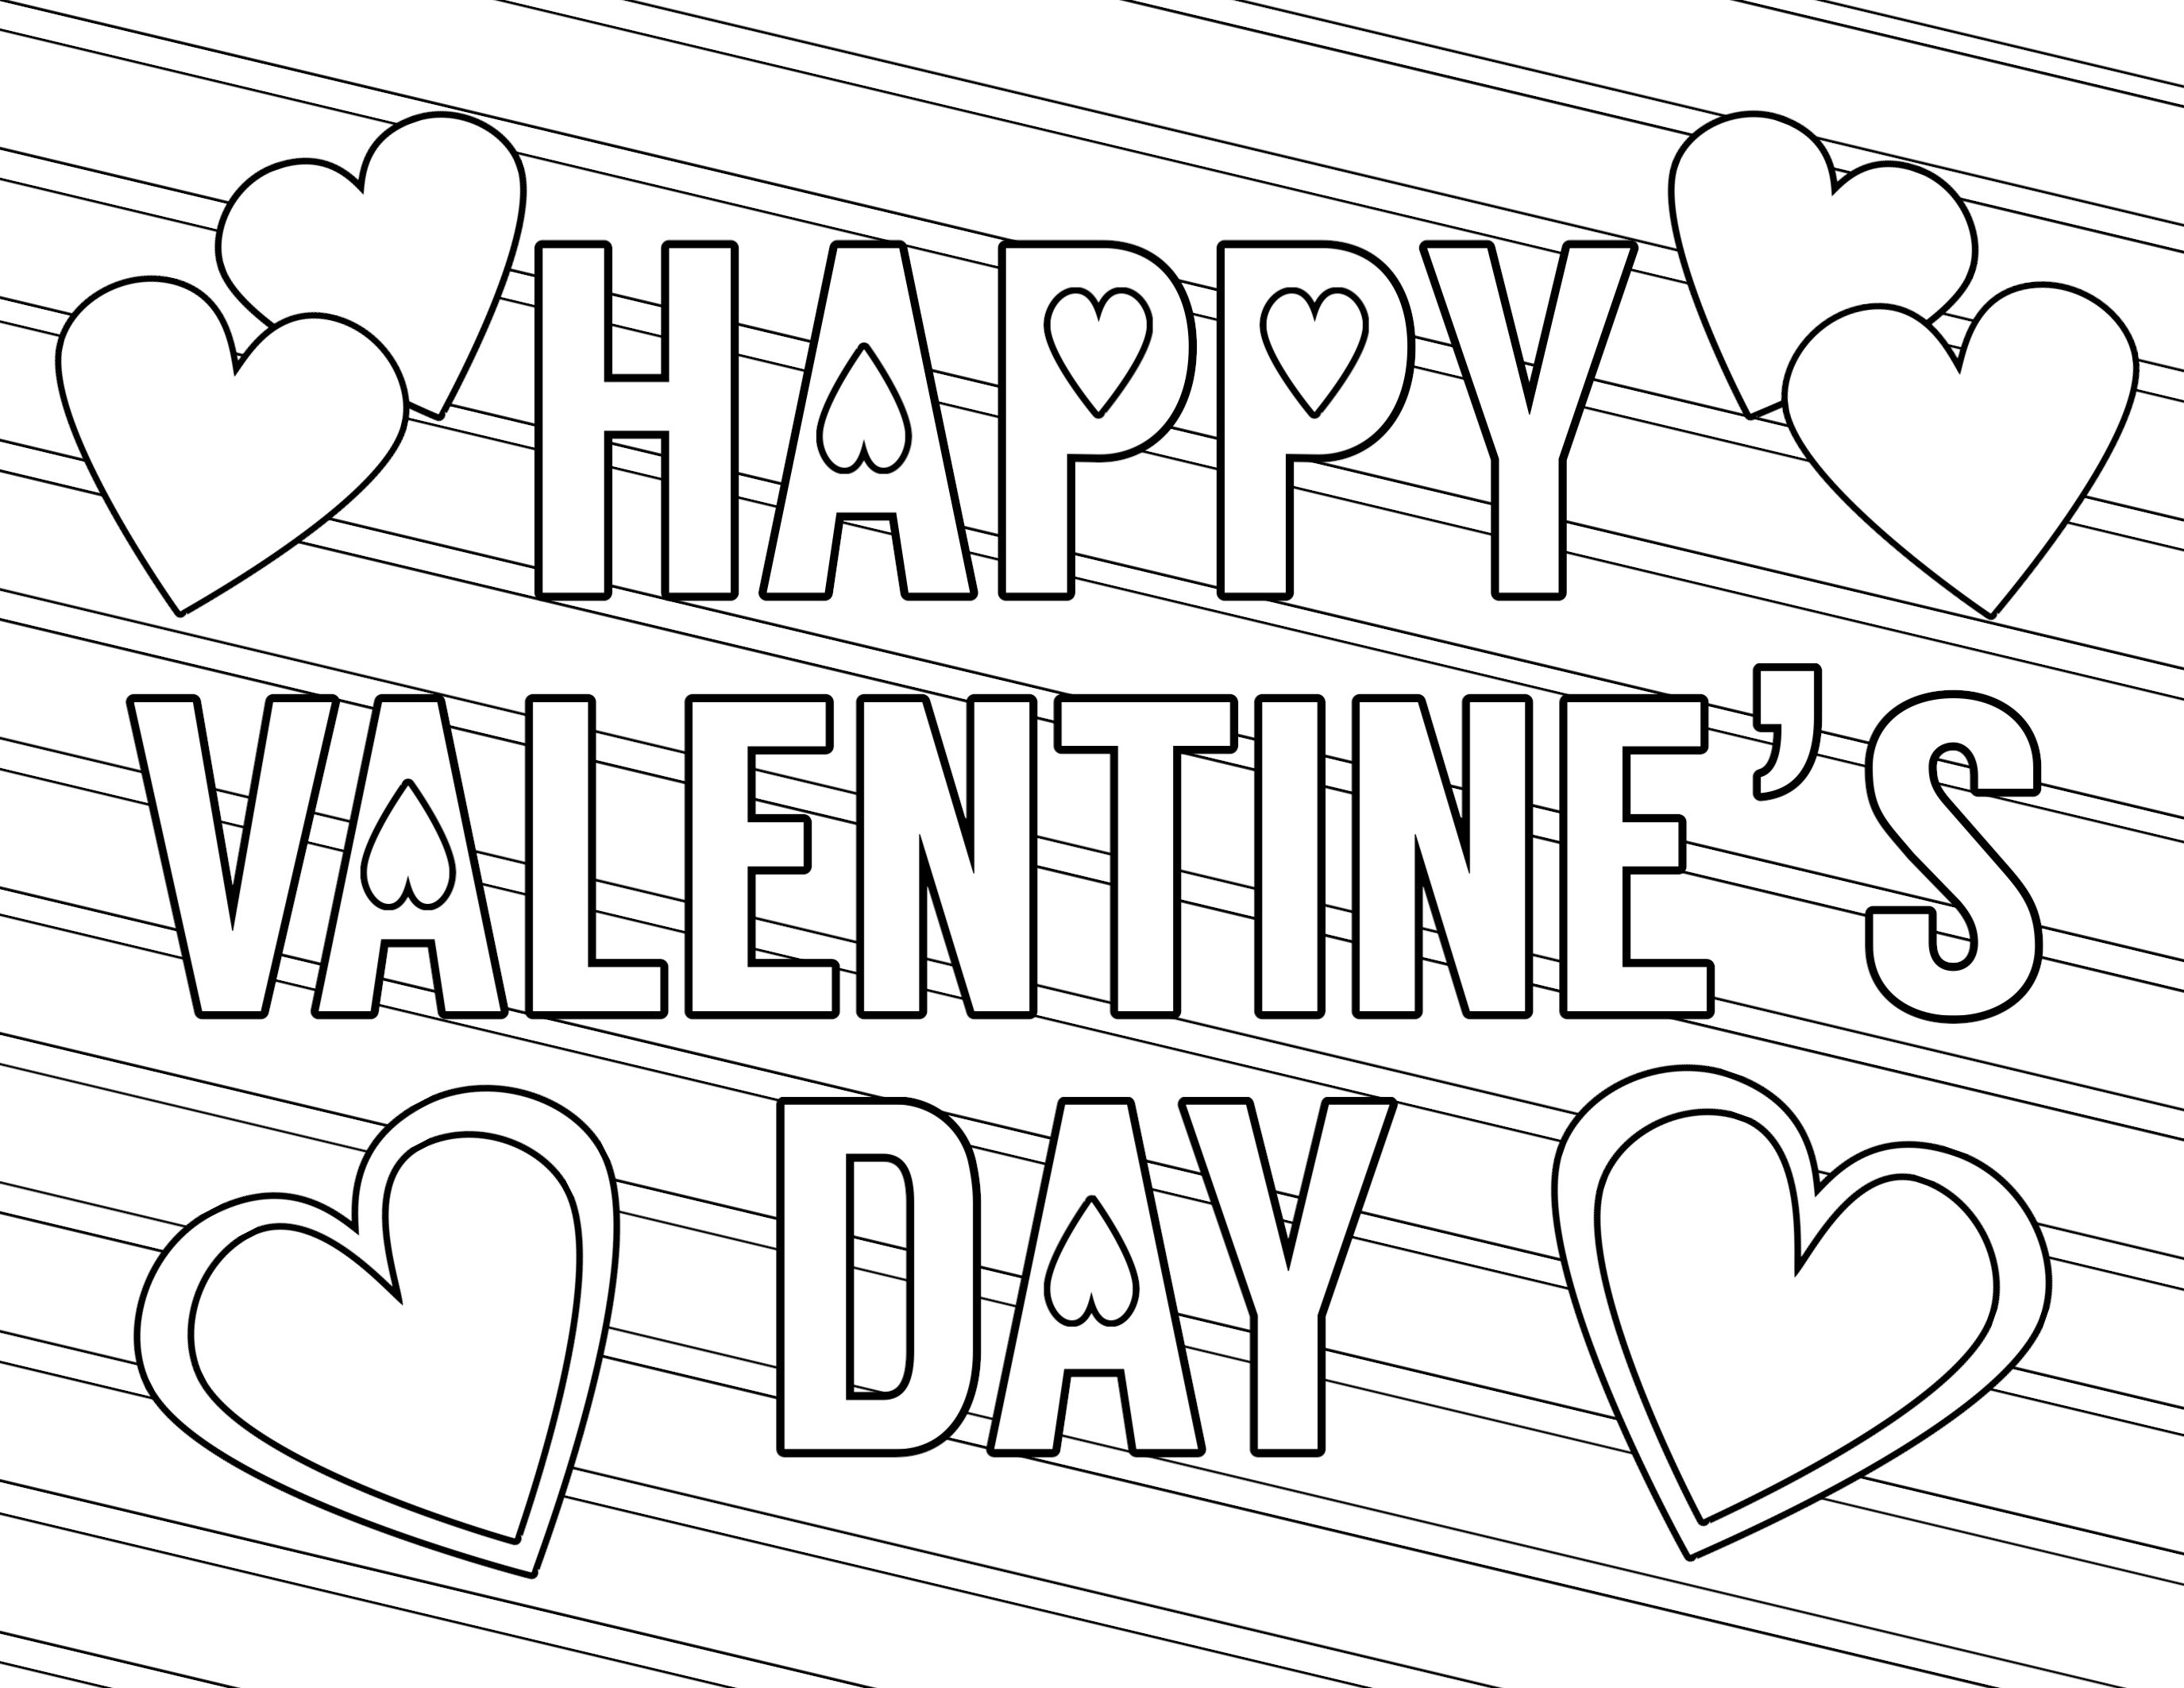 Coloring Ideas : Stunning Free Valentines Day Coloring Pages Page - Free Printable Heart Designs